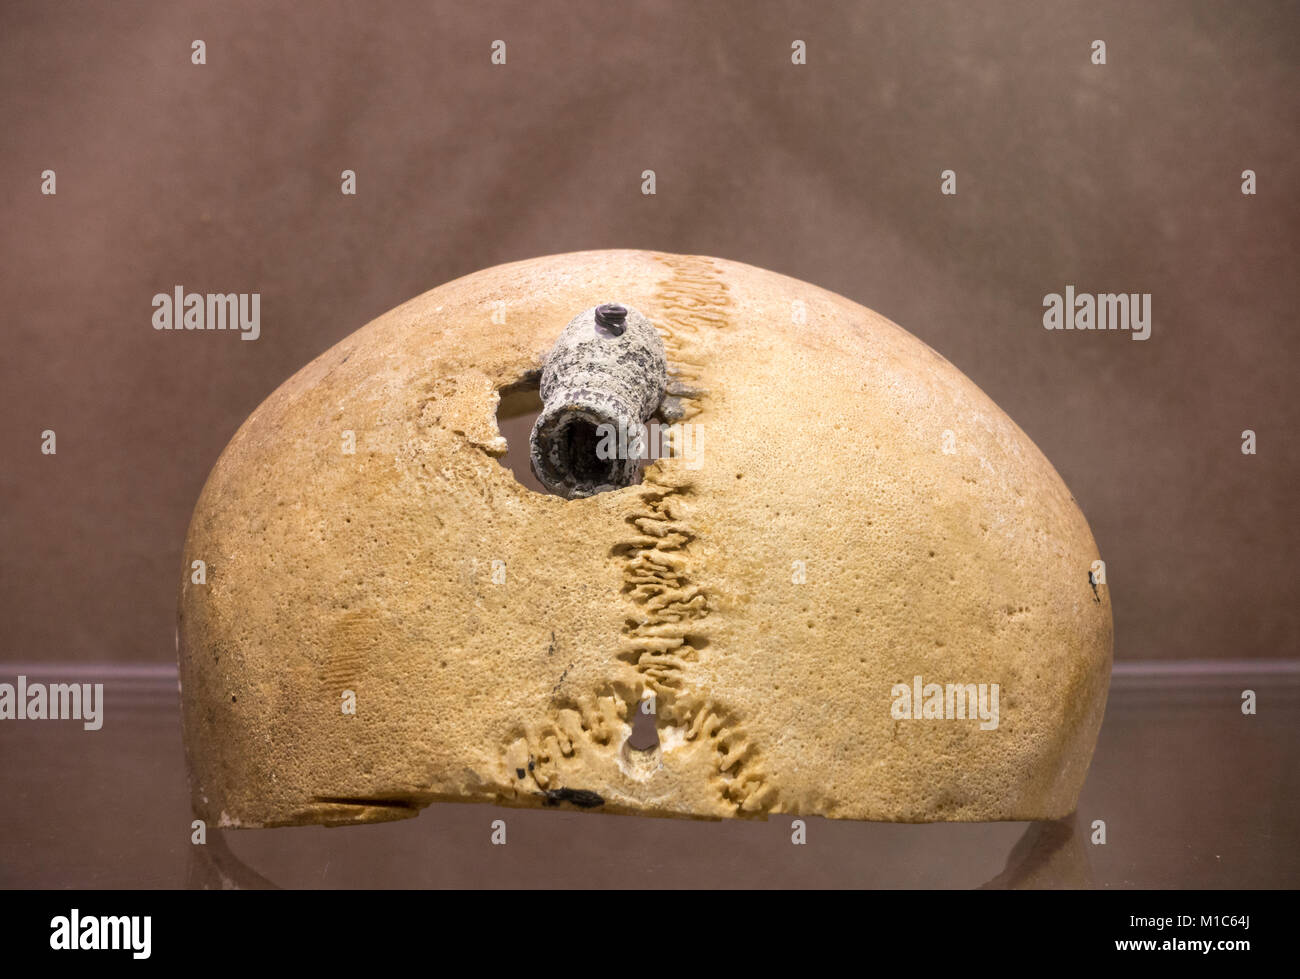 American Civil War human skull with the remains of a bullet on display in the National Museum of Health and Medicine, Silver Spring, MD, USA. Stock Photo